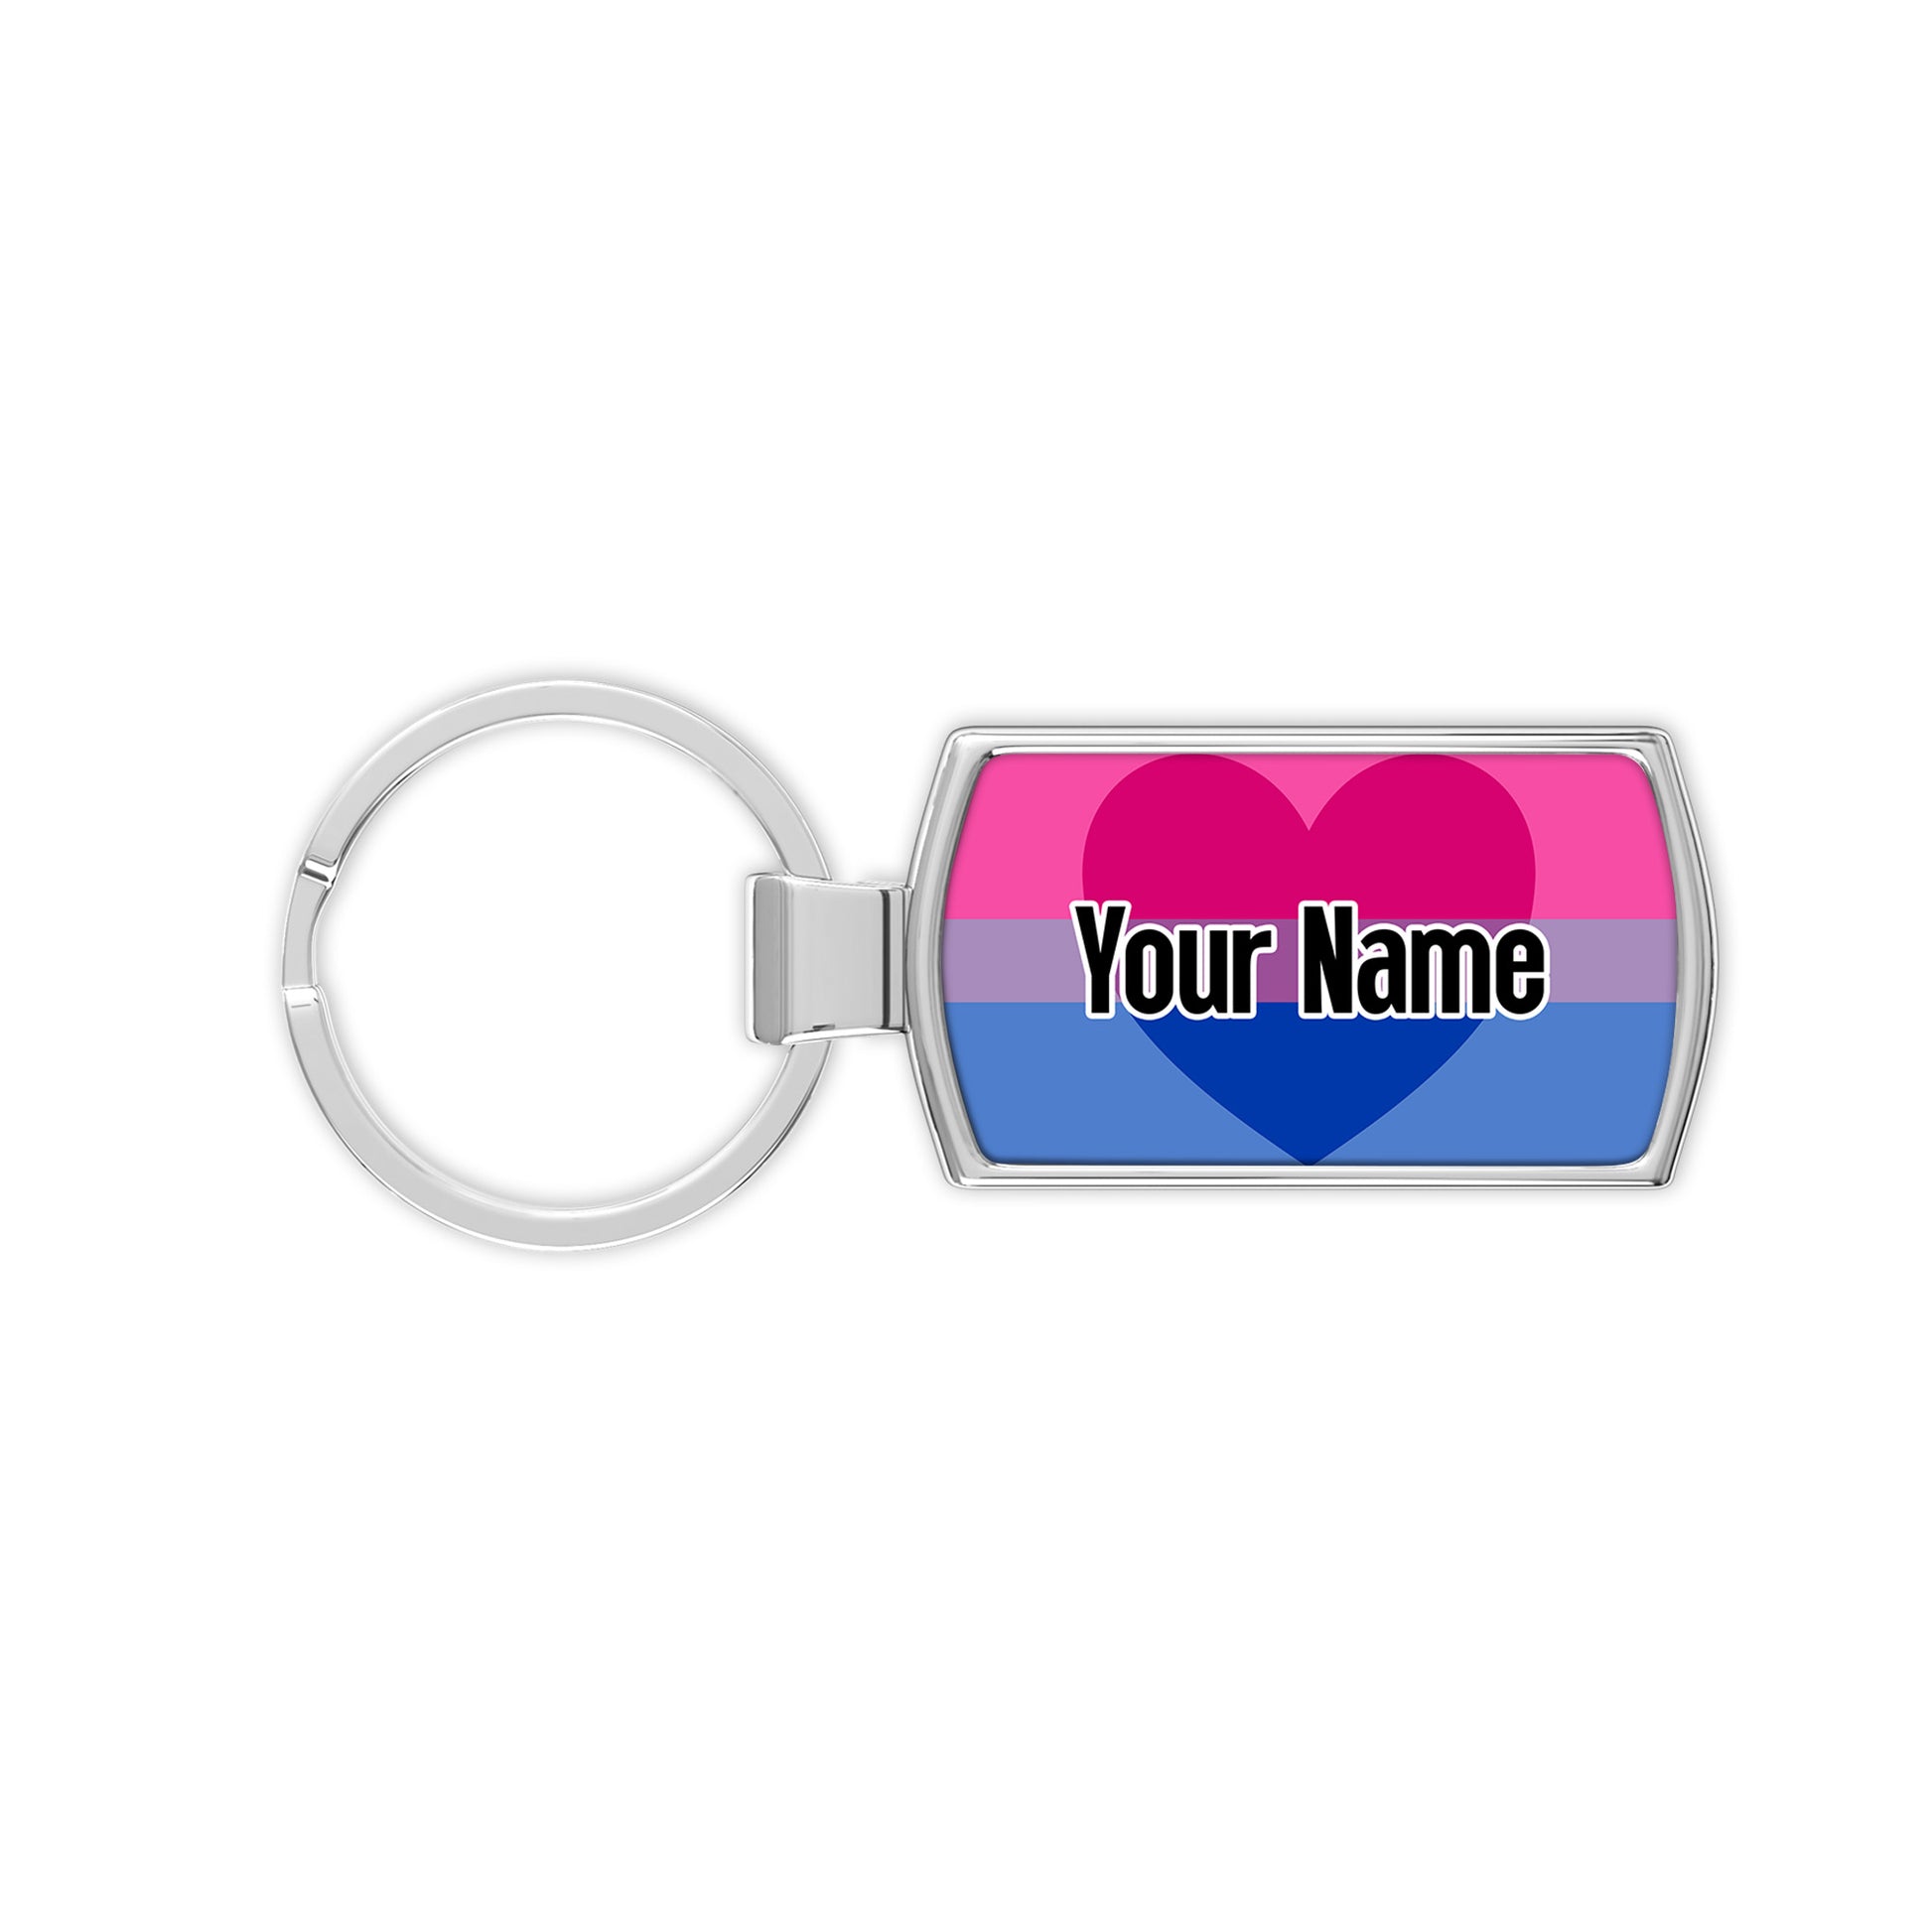 Biromantic pride flag metal keyring personalised with your name